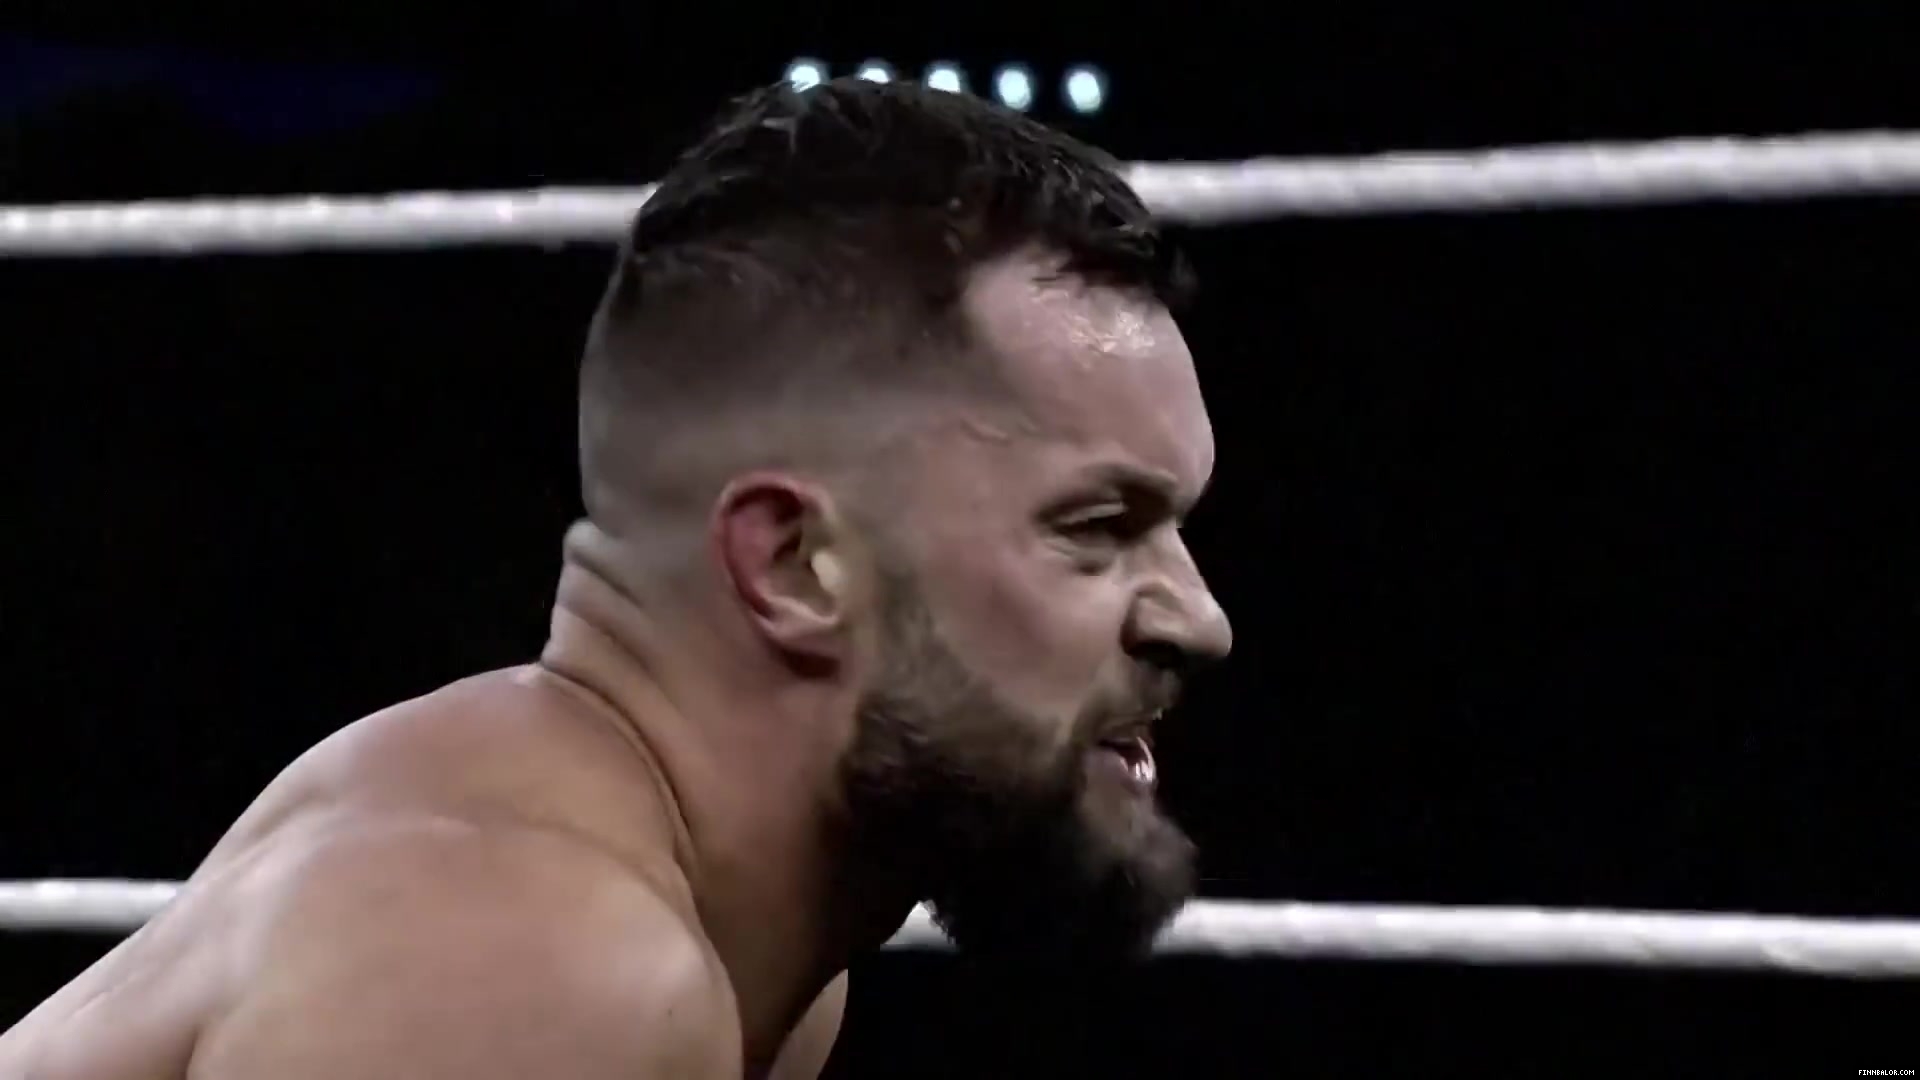 Finn_Balor___The_Rising_of_the_Prince_in_NXT_173.jpg